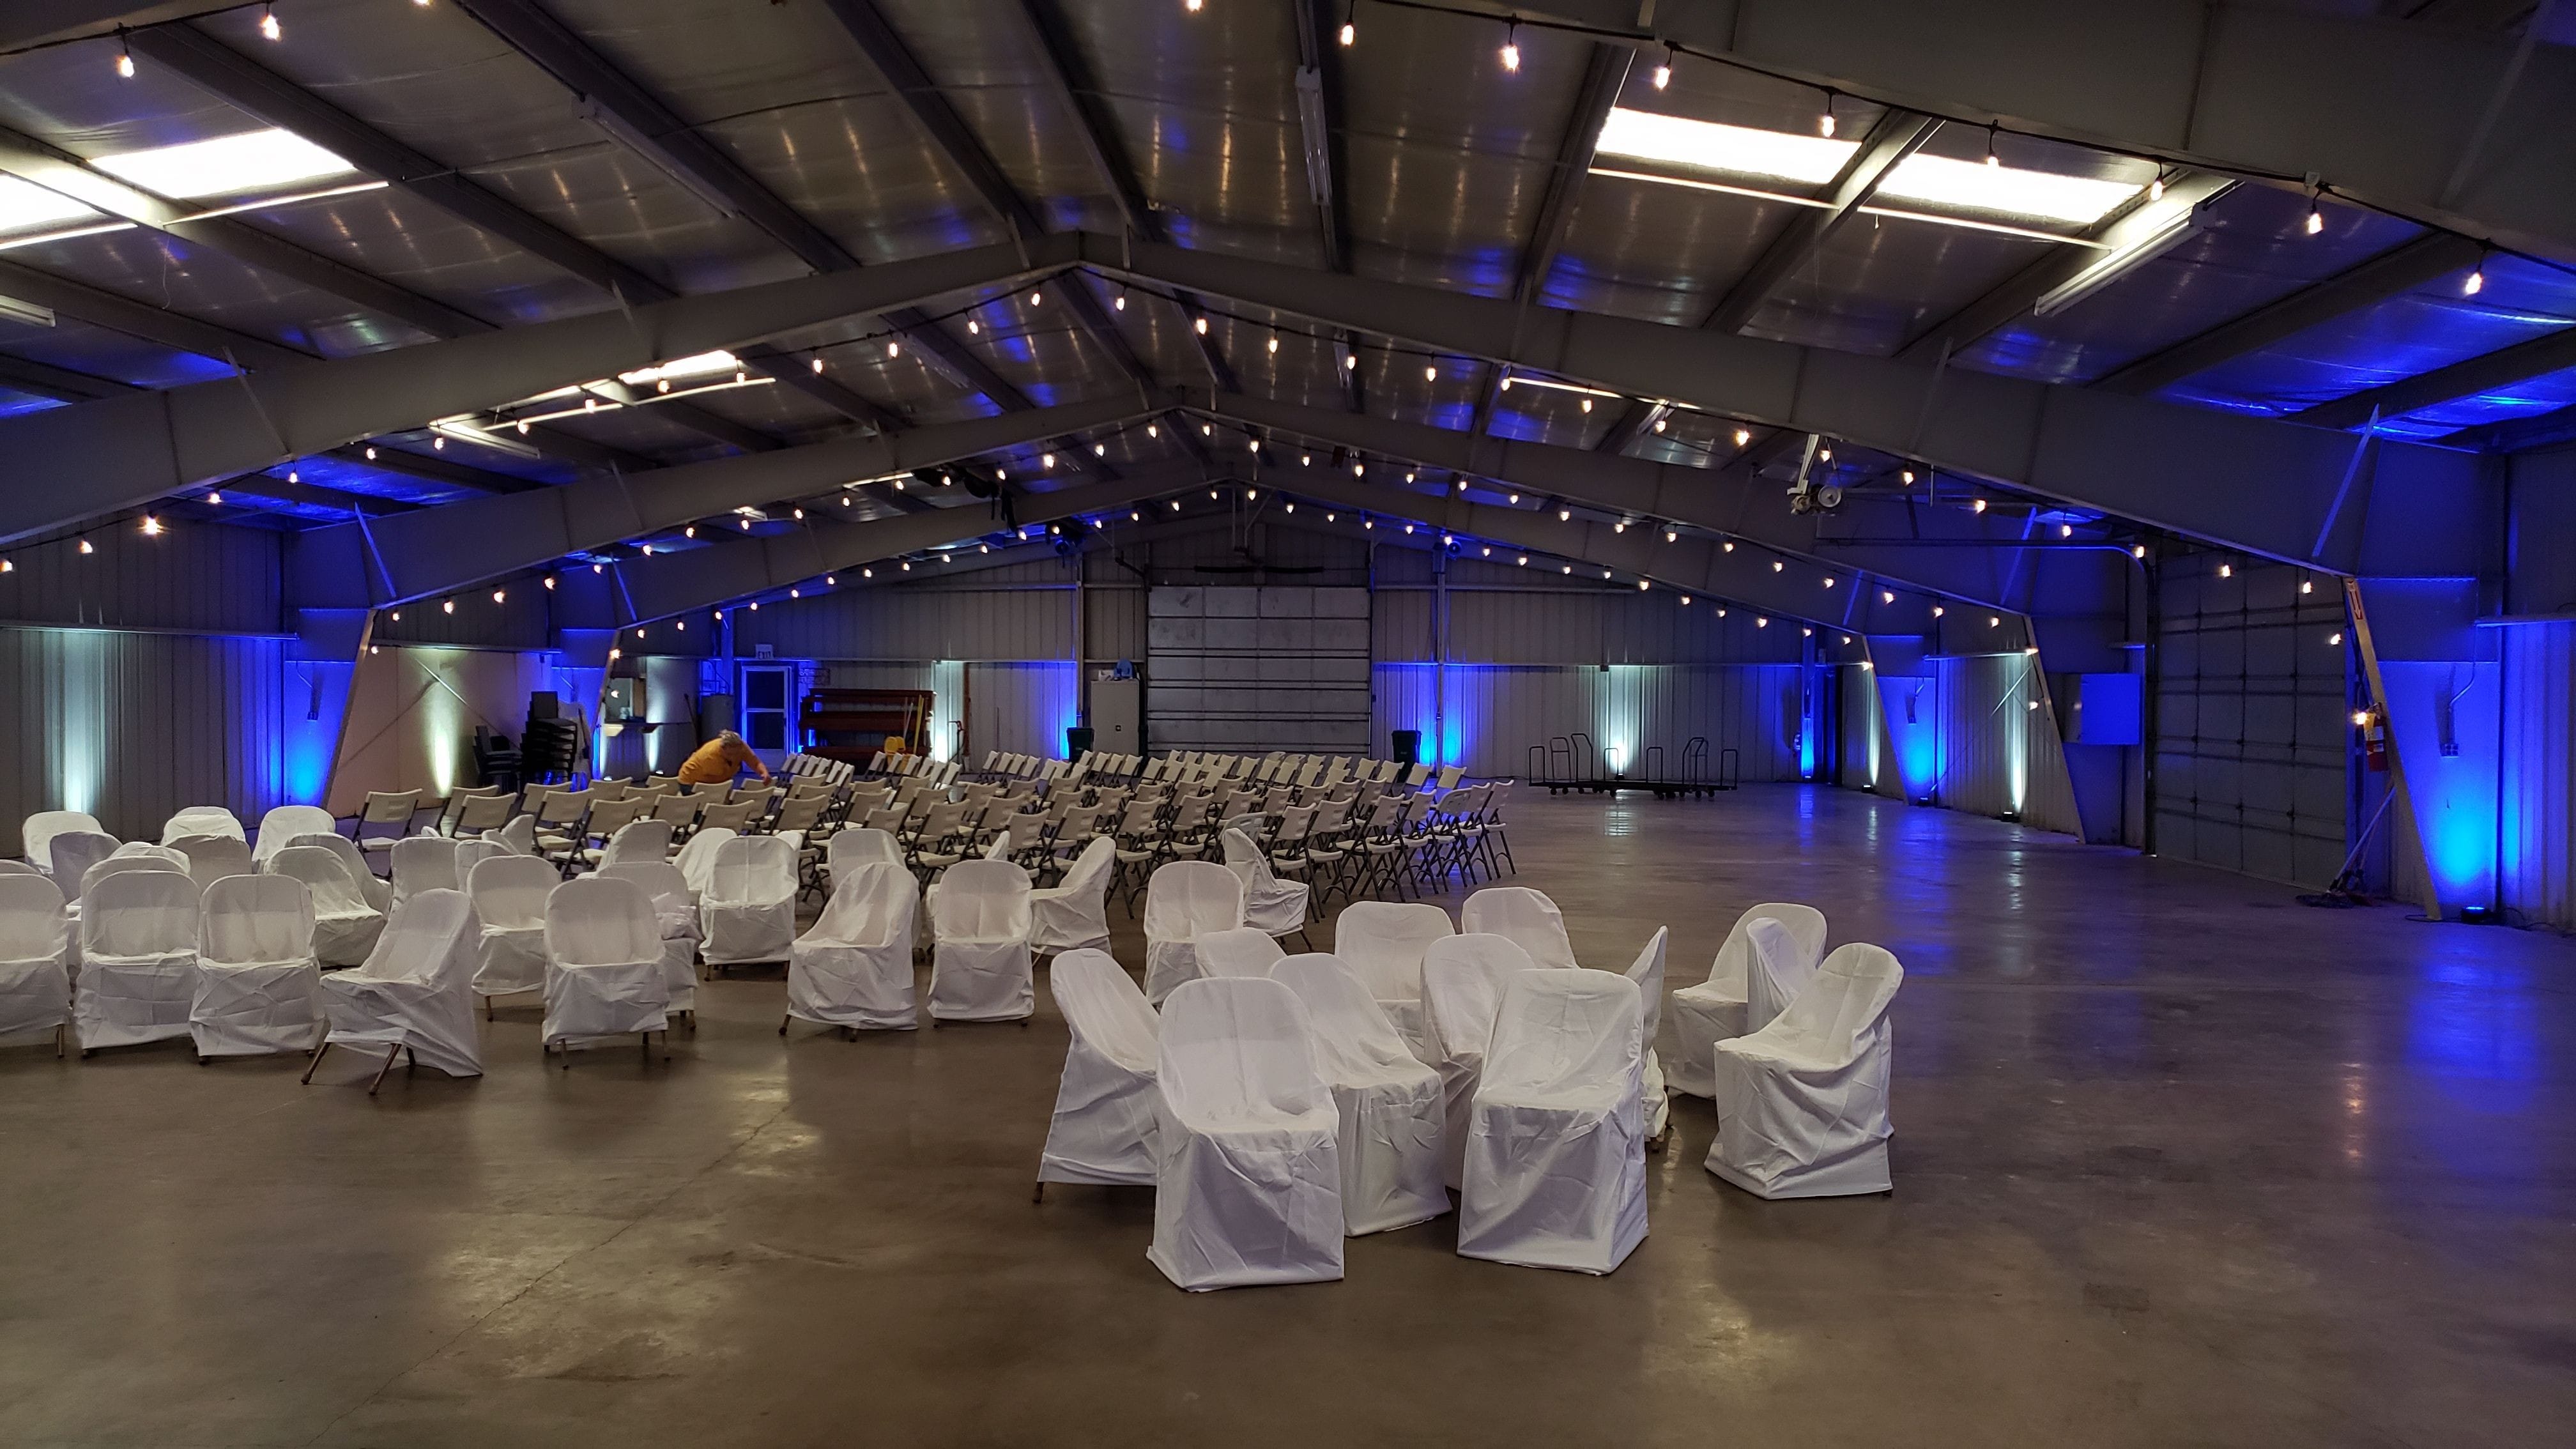 Lake County Fairgrounds wedding lighting in blue and white up lighting with bistro on the beams by Duluth Event Lighting.